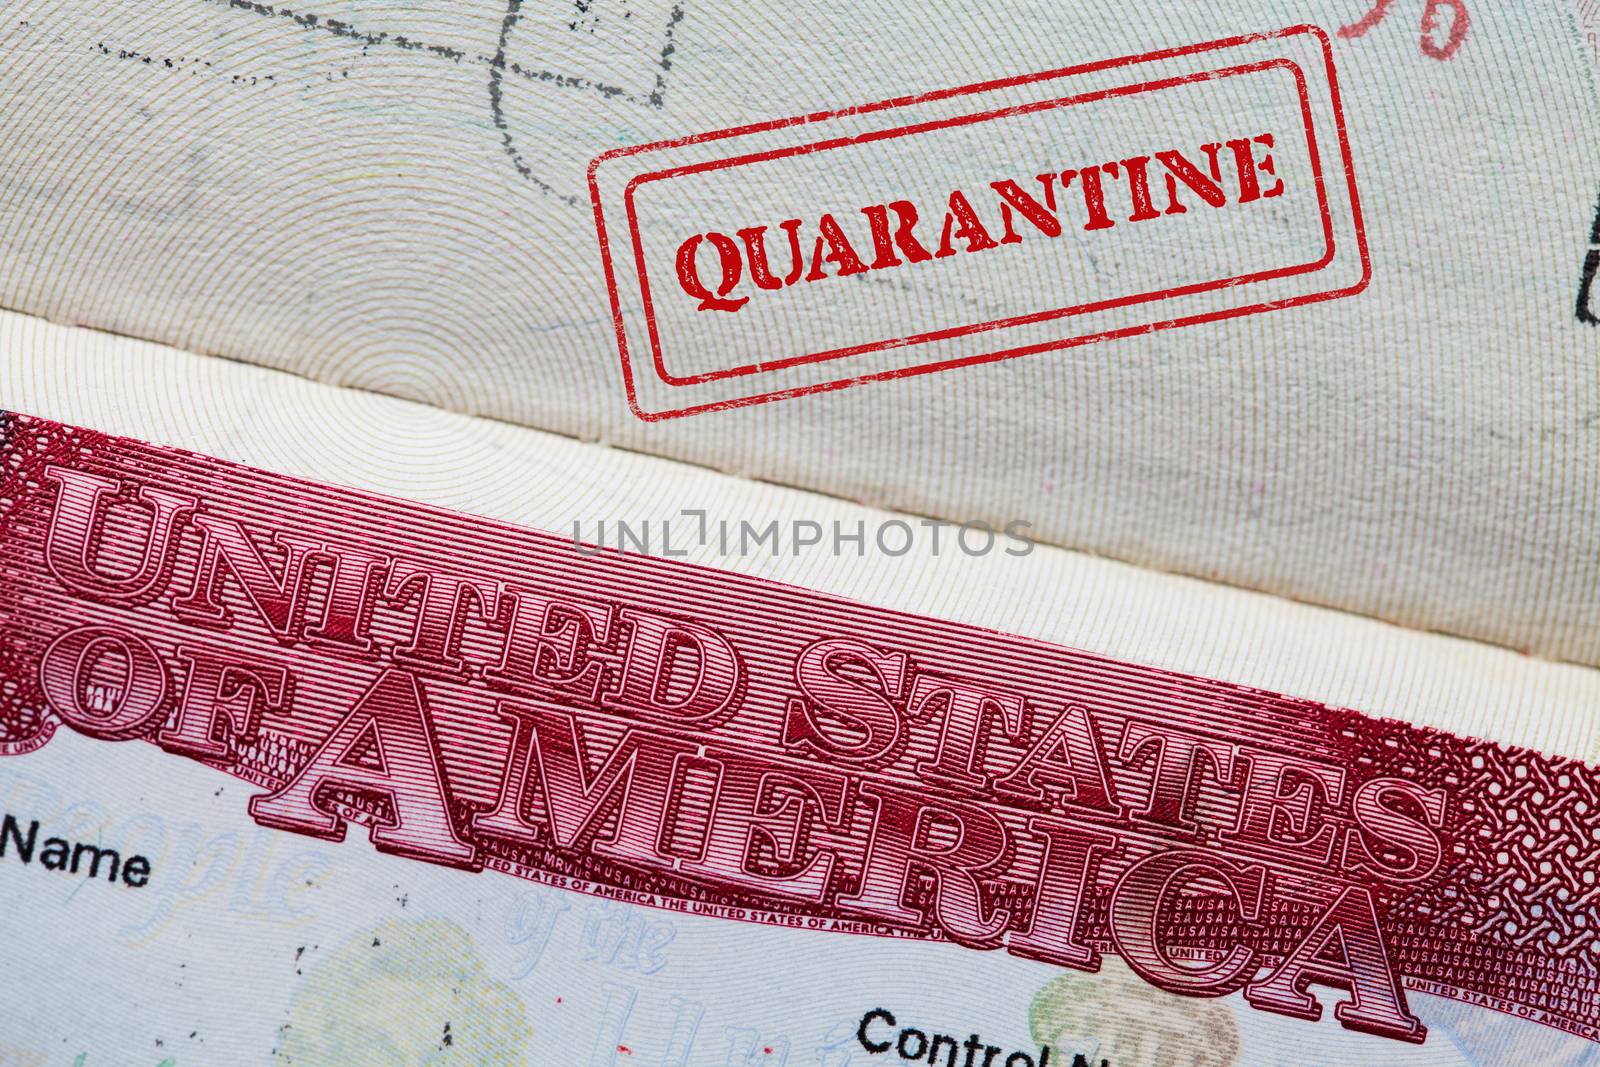 Passport with U.S. visa with QUARANTINE stamped upon arrival  by Plyushkin